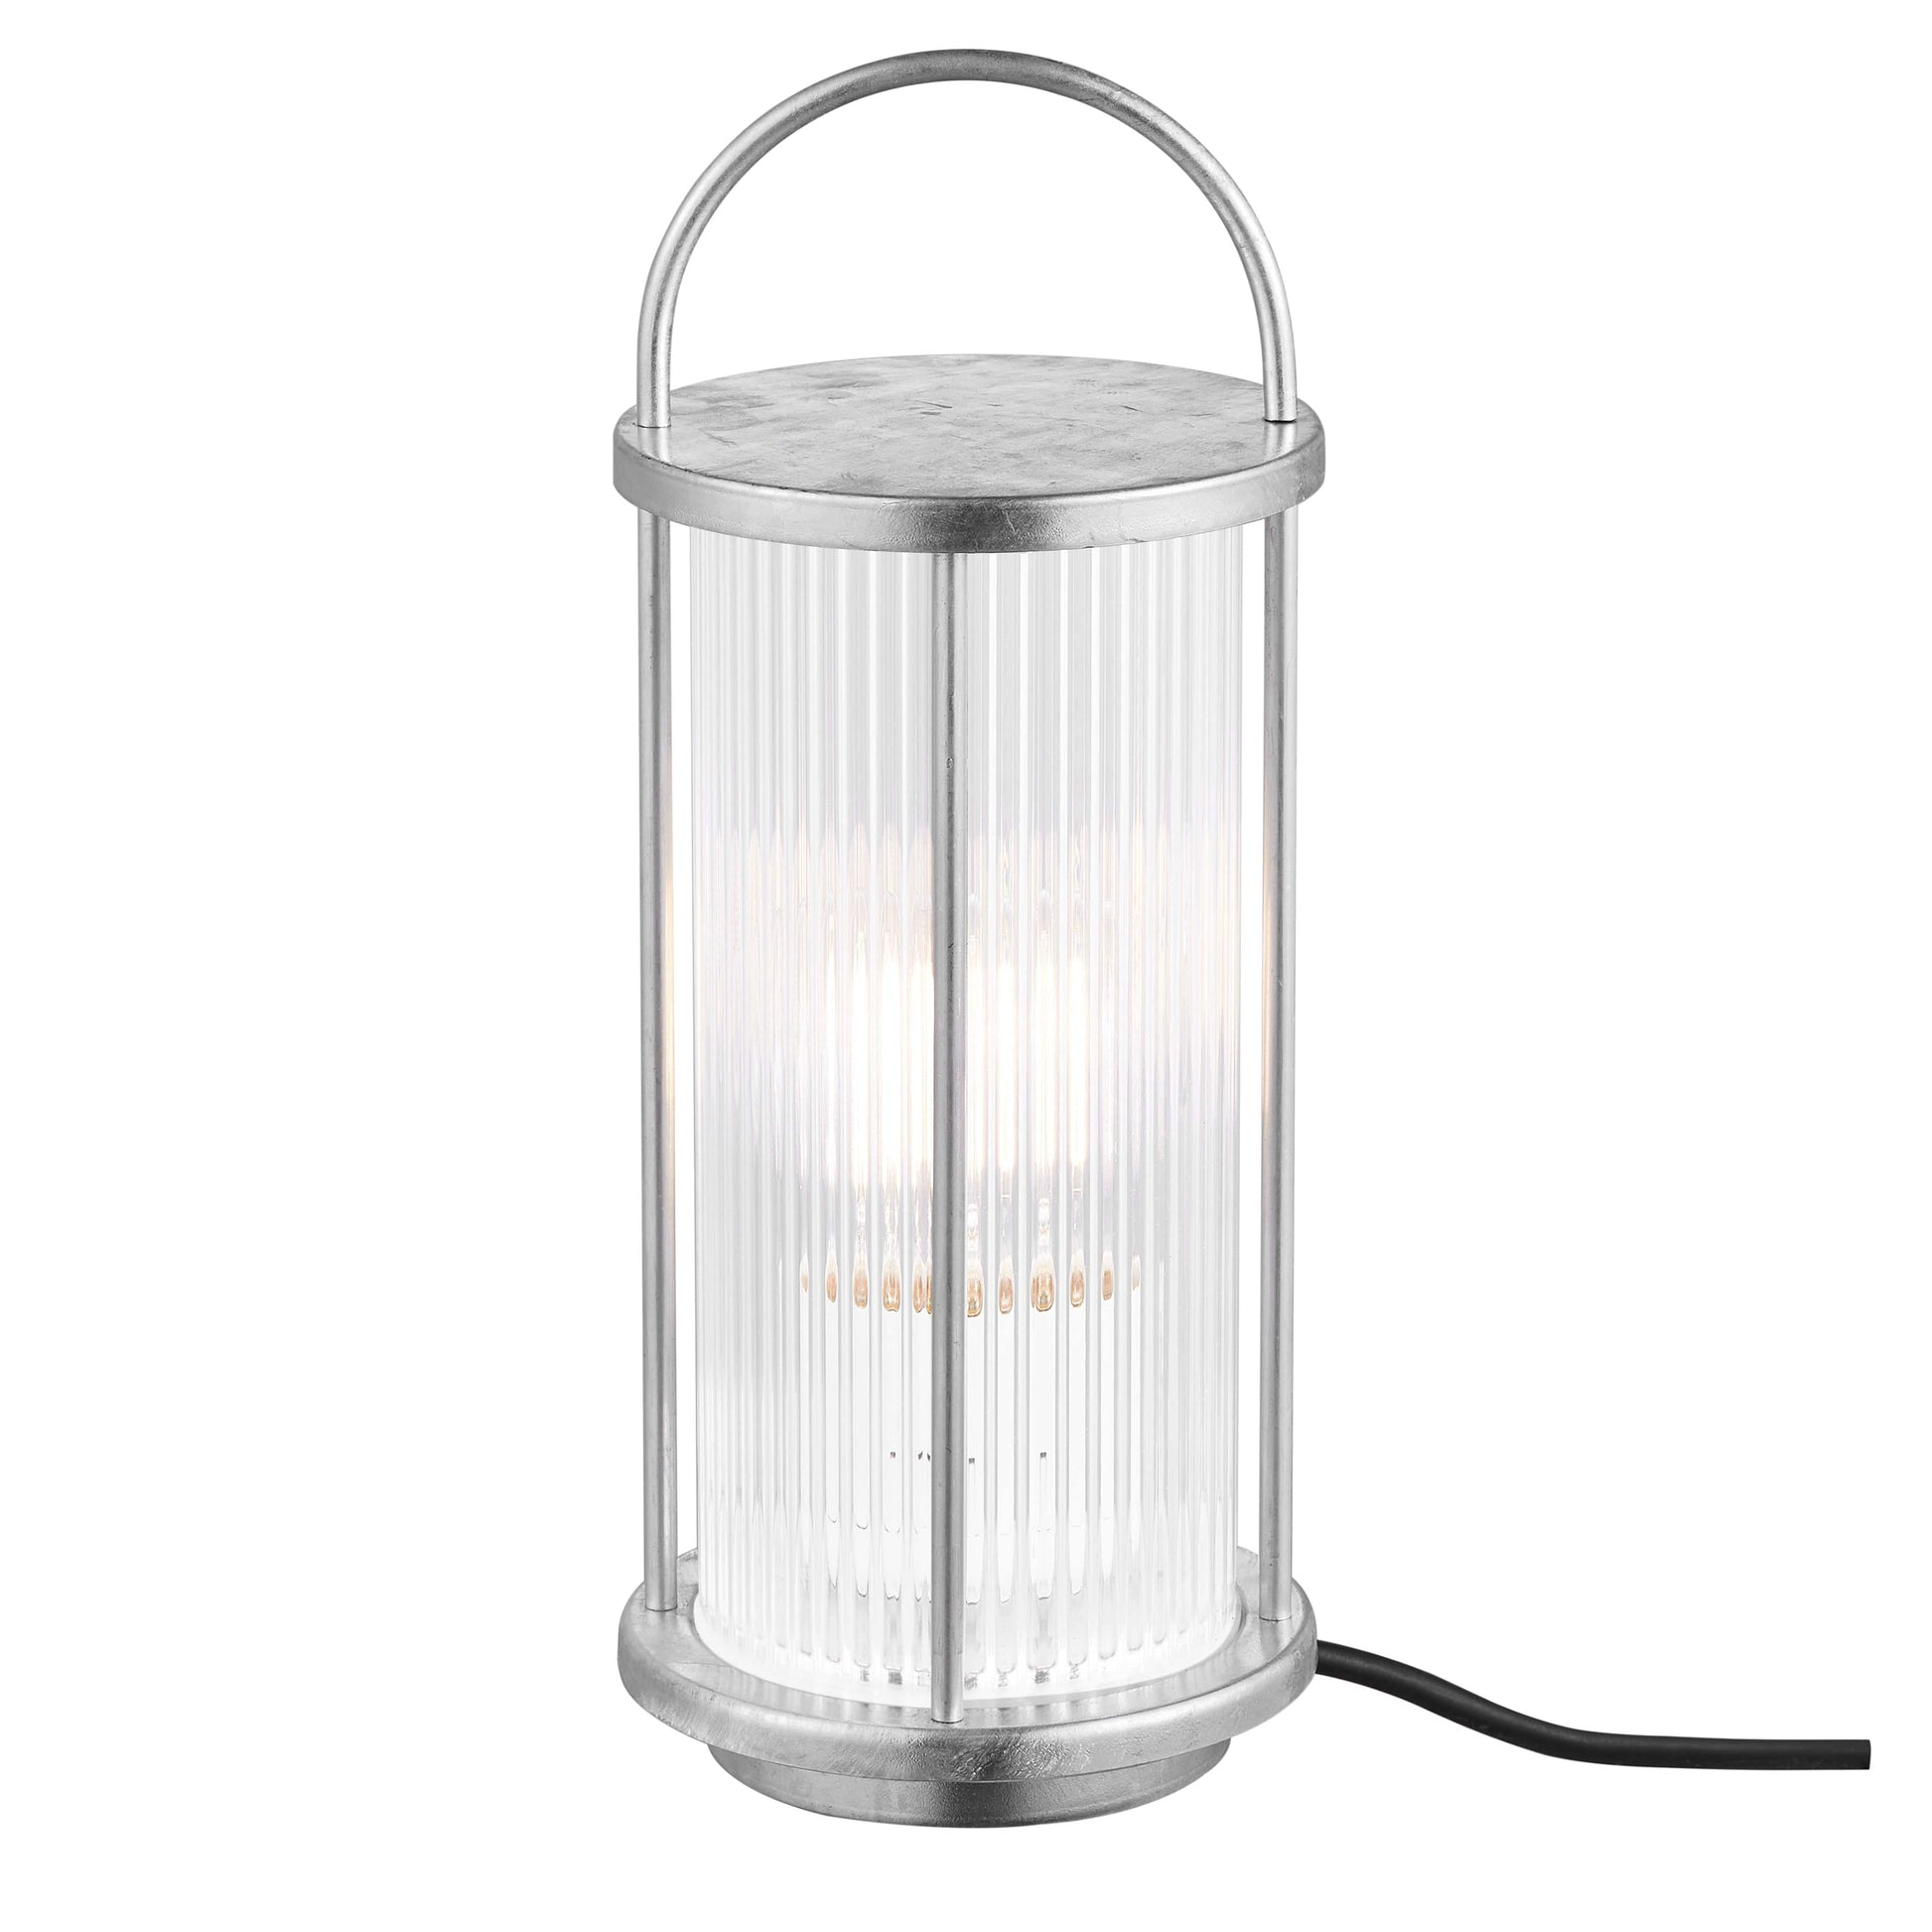 Nordlux Outdoor Lights Galvanised Linton Outdoor Table Lamp, brass or galvanised